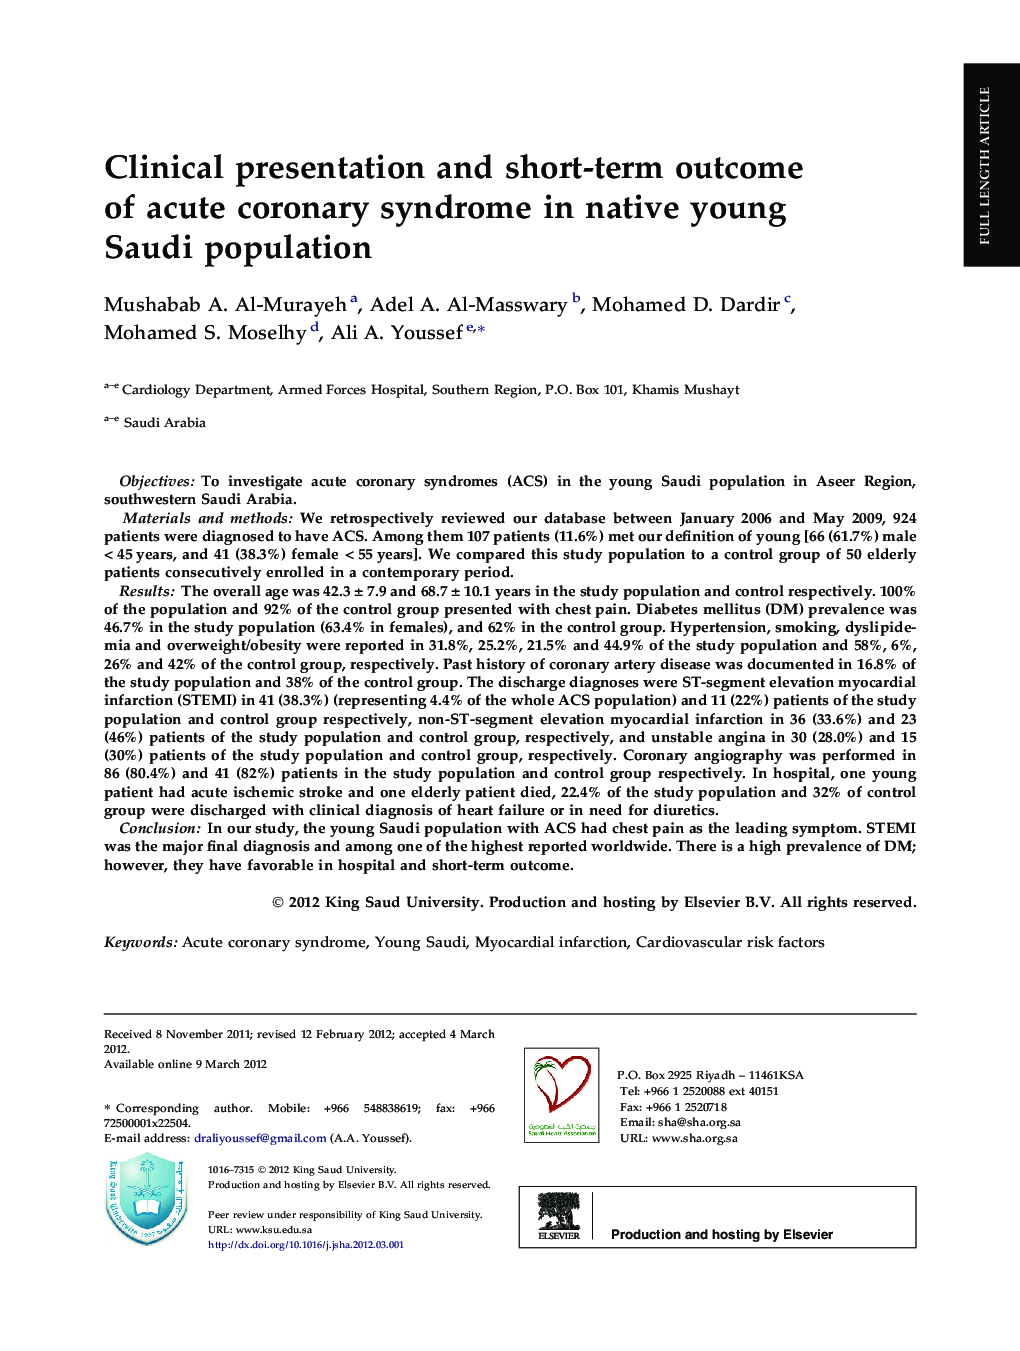 Clinical presentation and short-term outcome of acute coronary syndrome in native young Saudi population 